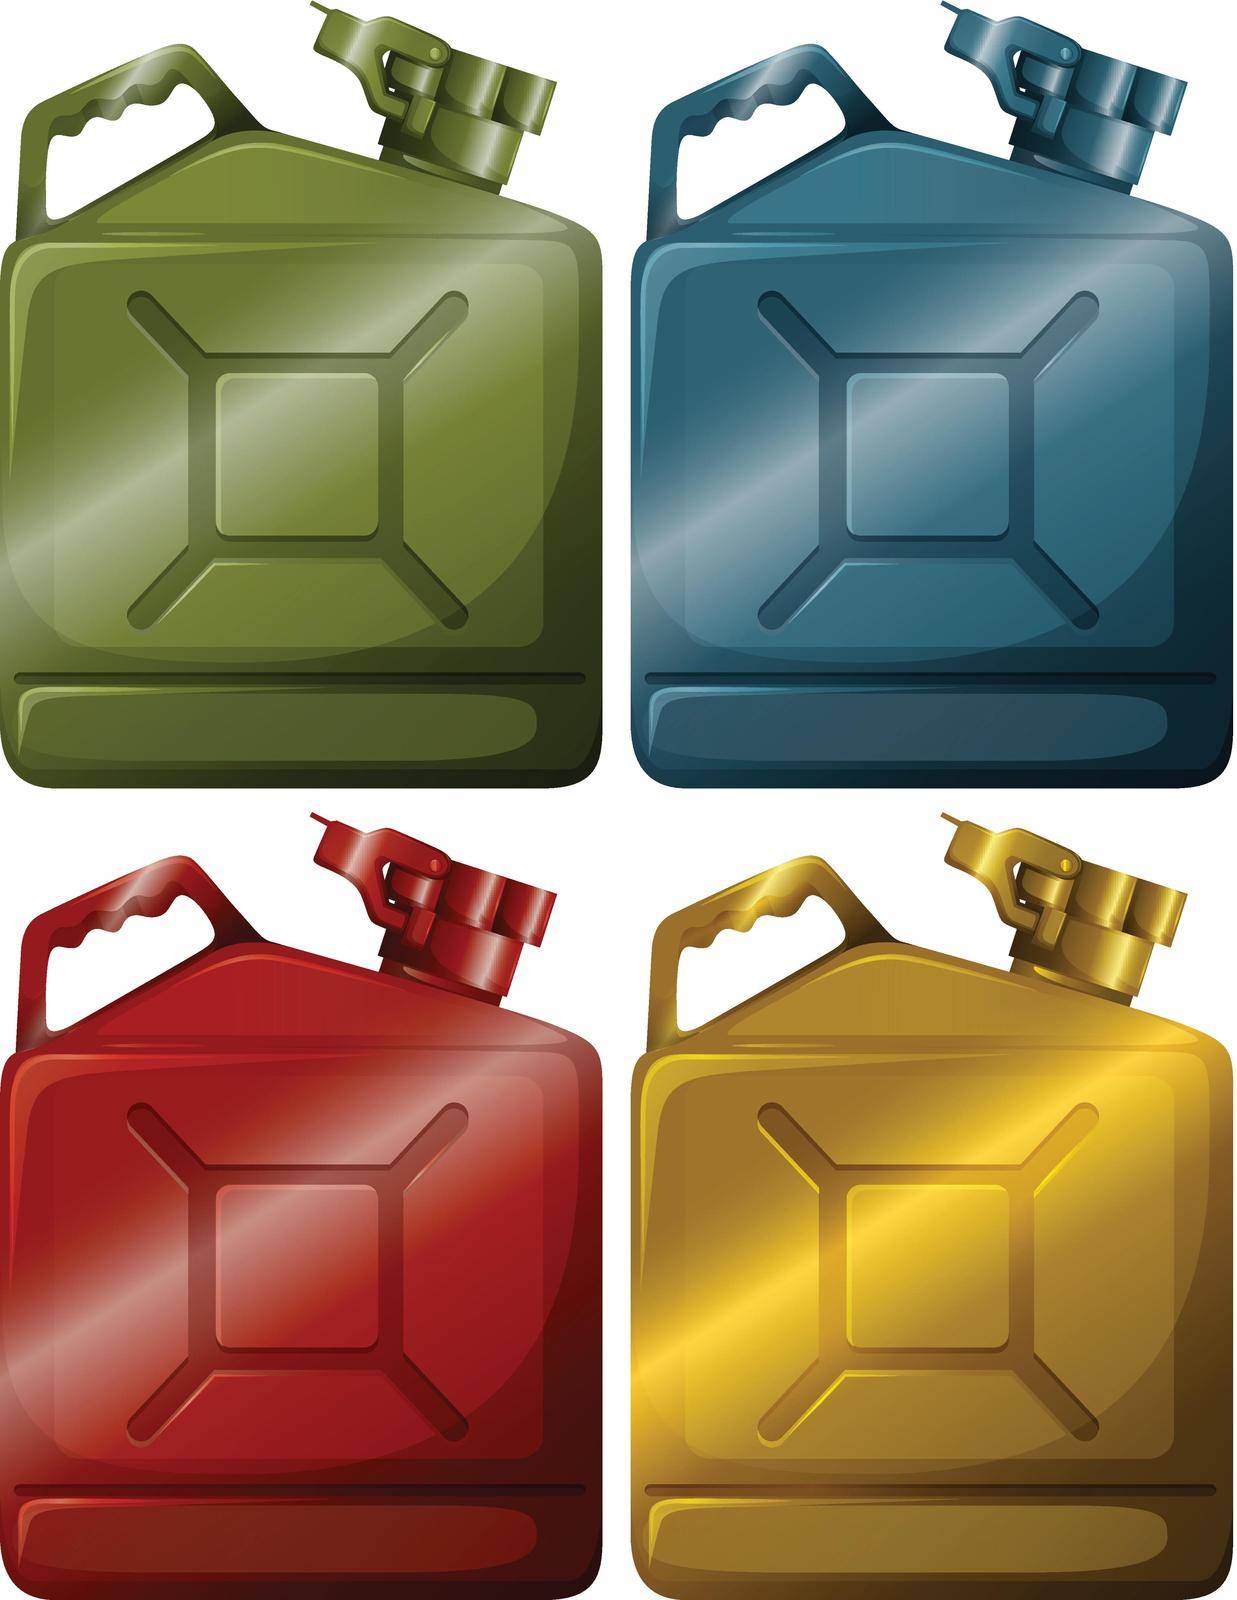 Illustration of the gasoline containers on a white background